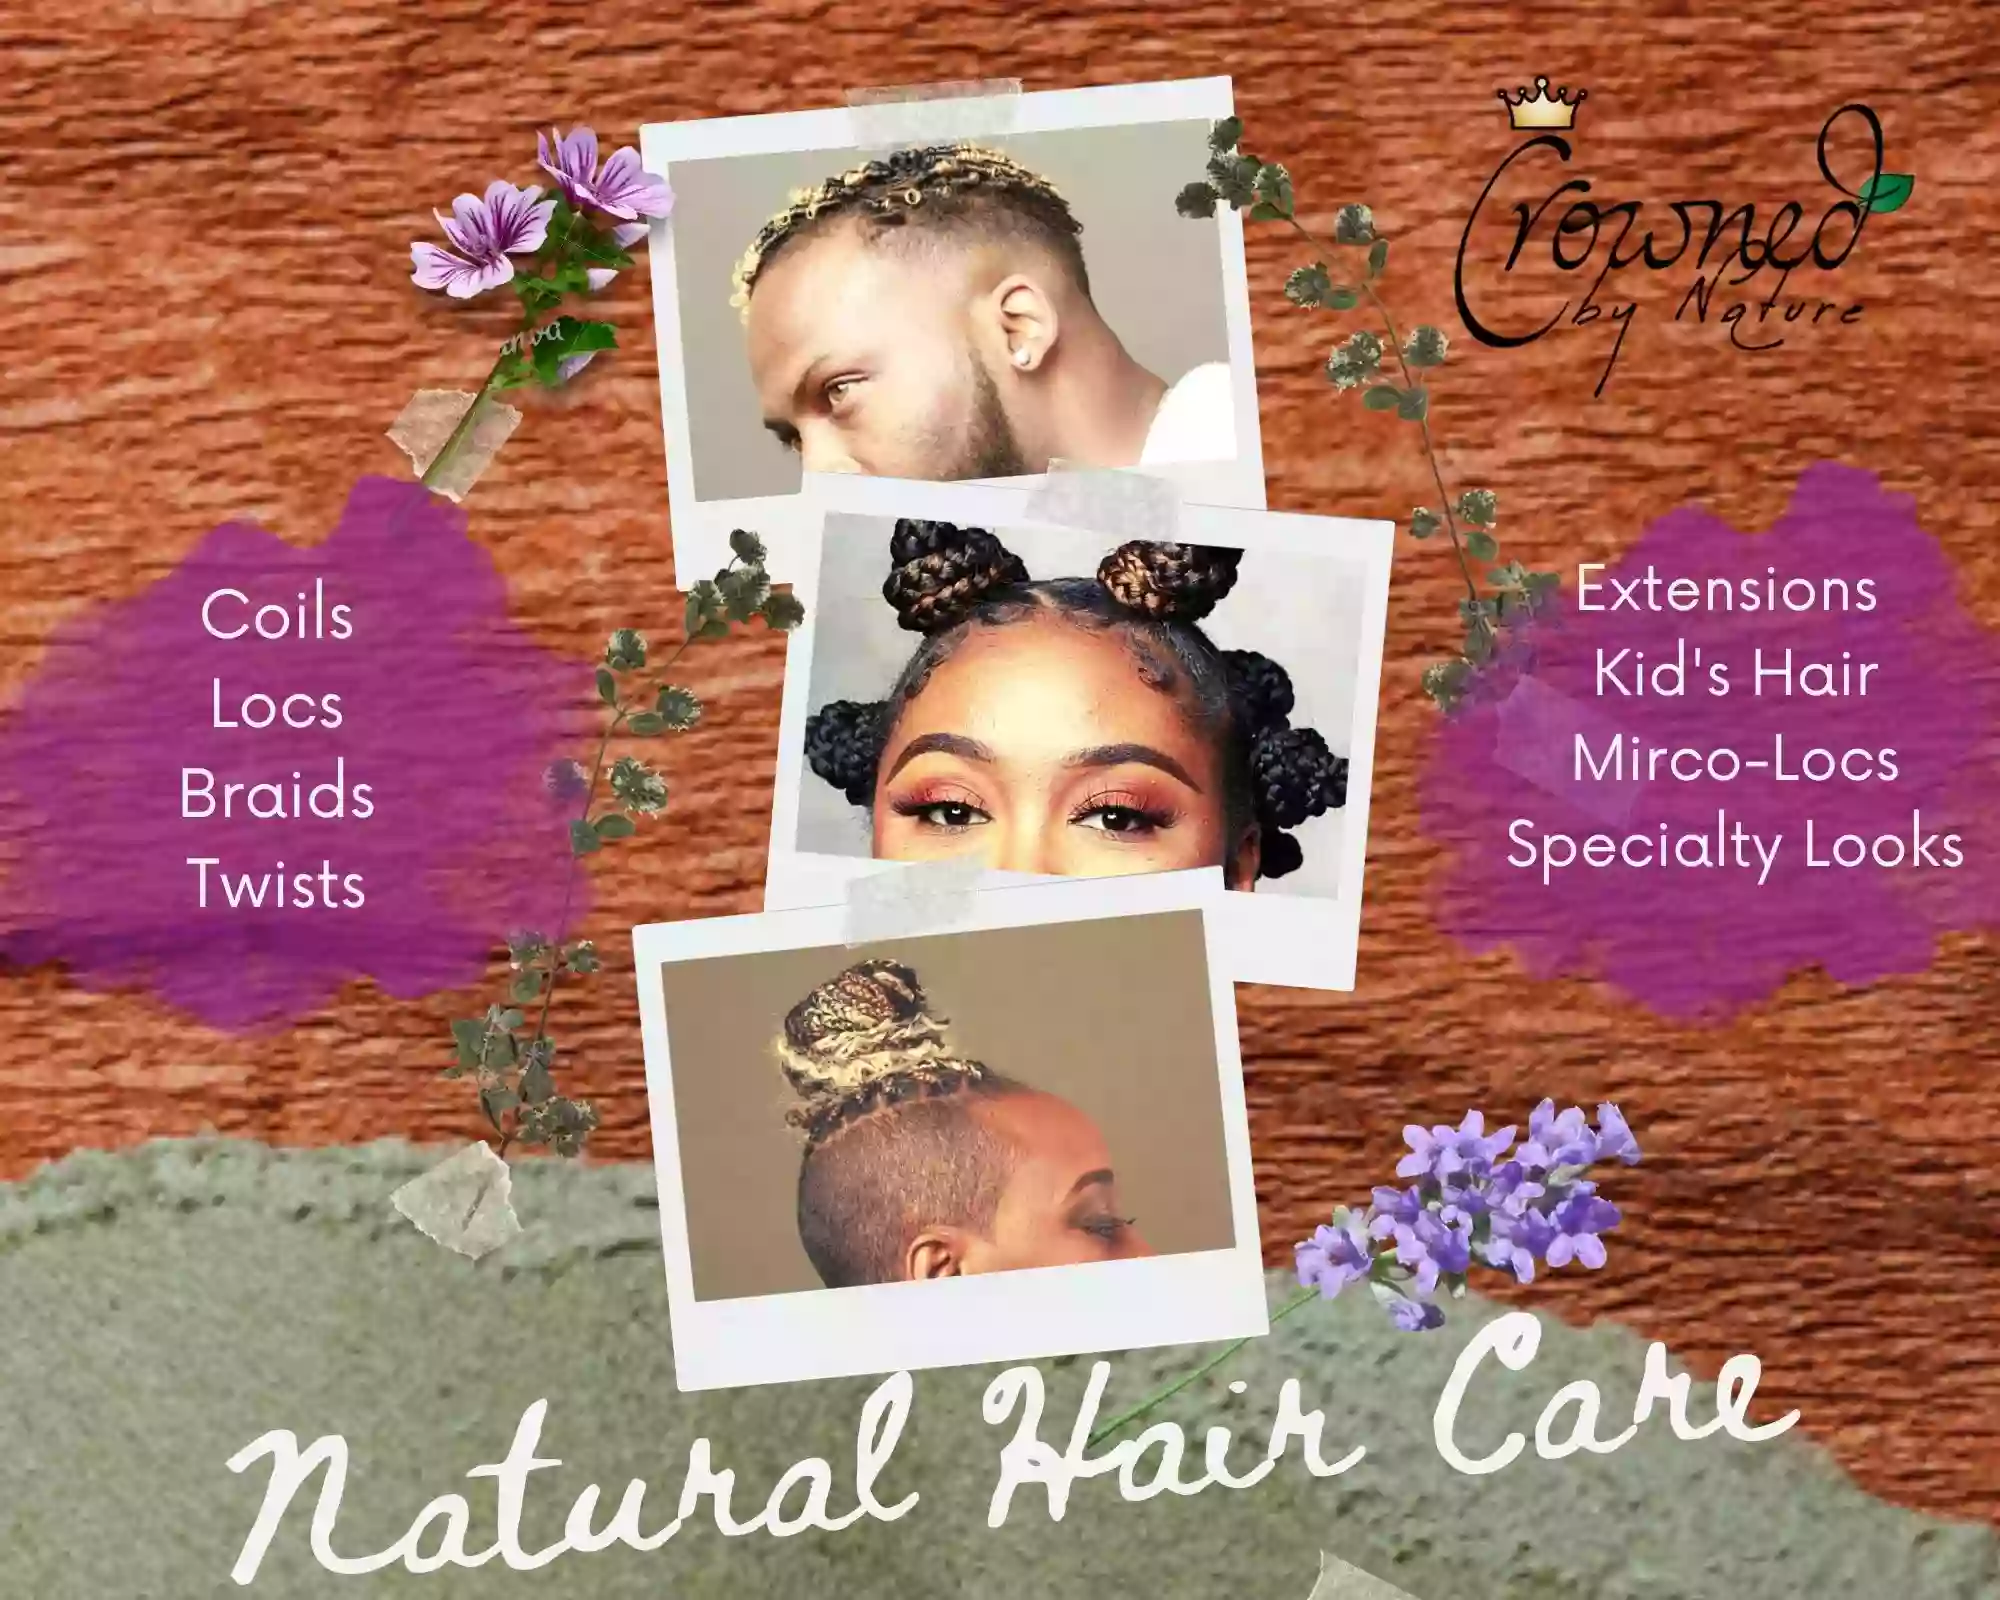 Crowned by Nature Beauty Salon